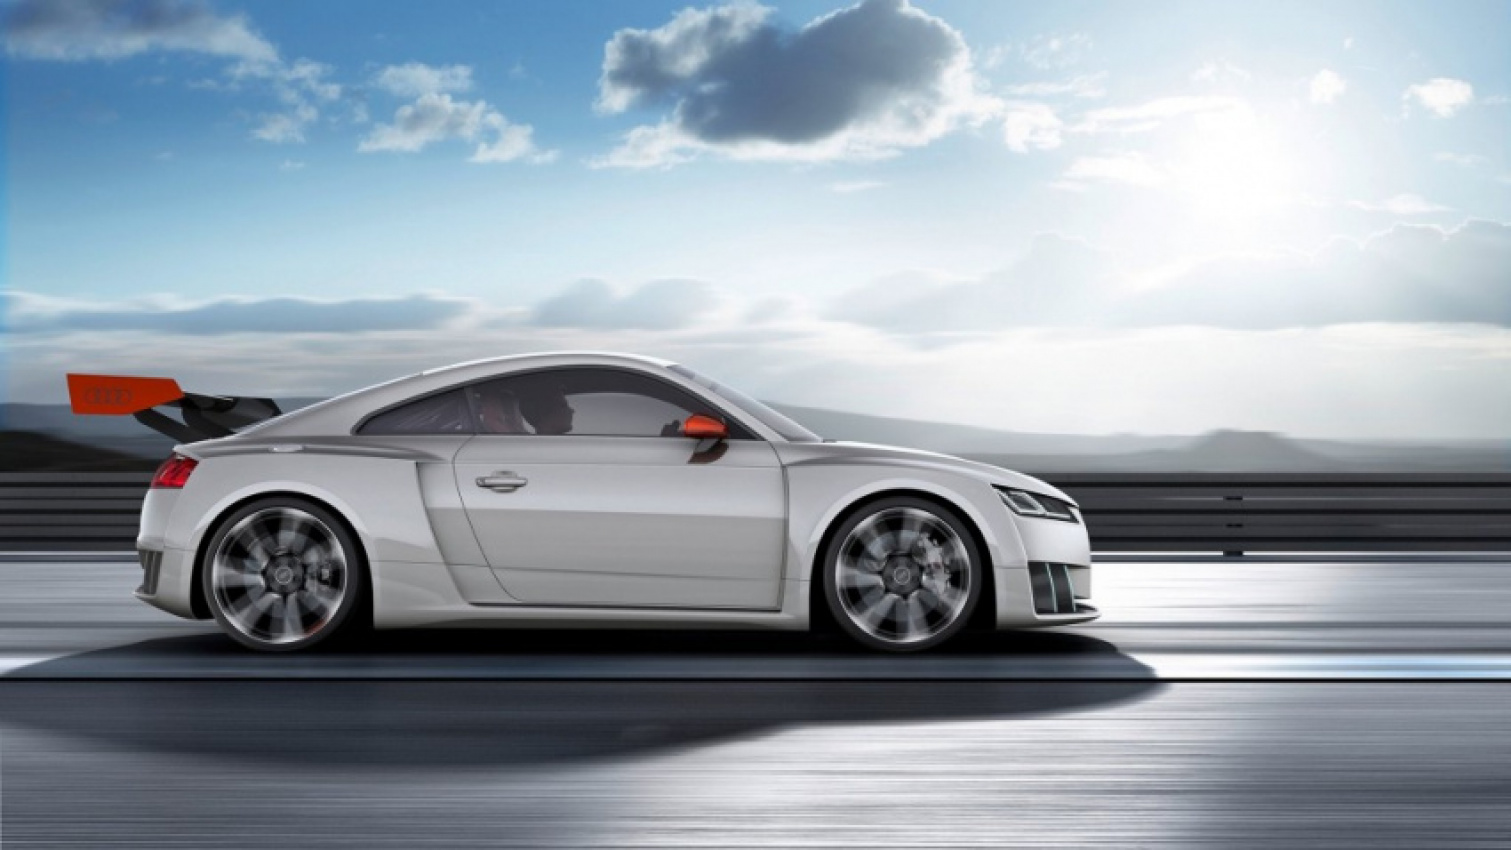 audi, autos, cars, wortherseeq, audi to showcase tt clubsport turbo at worthersee